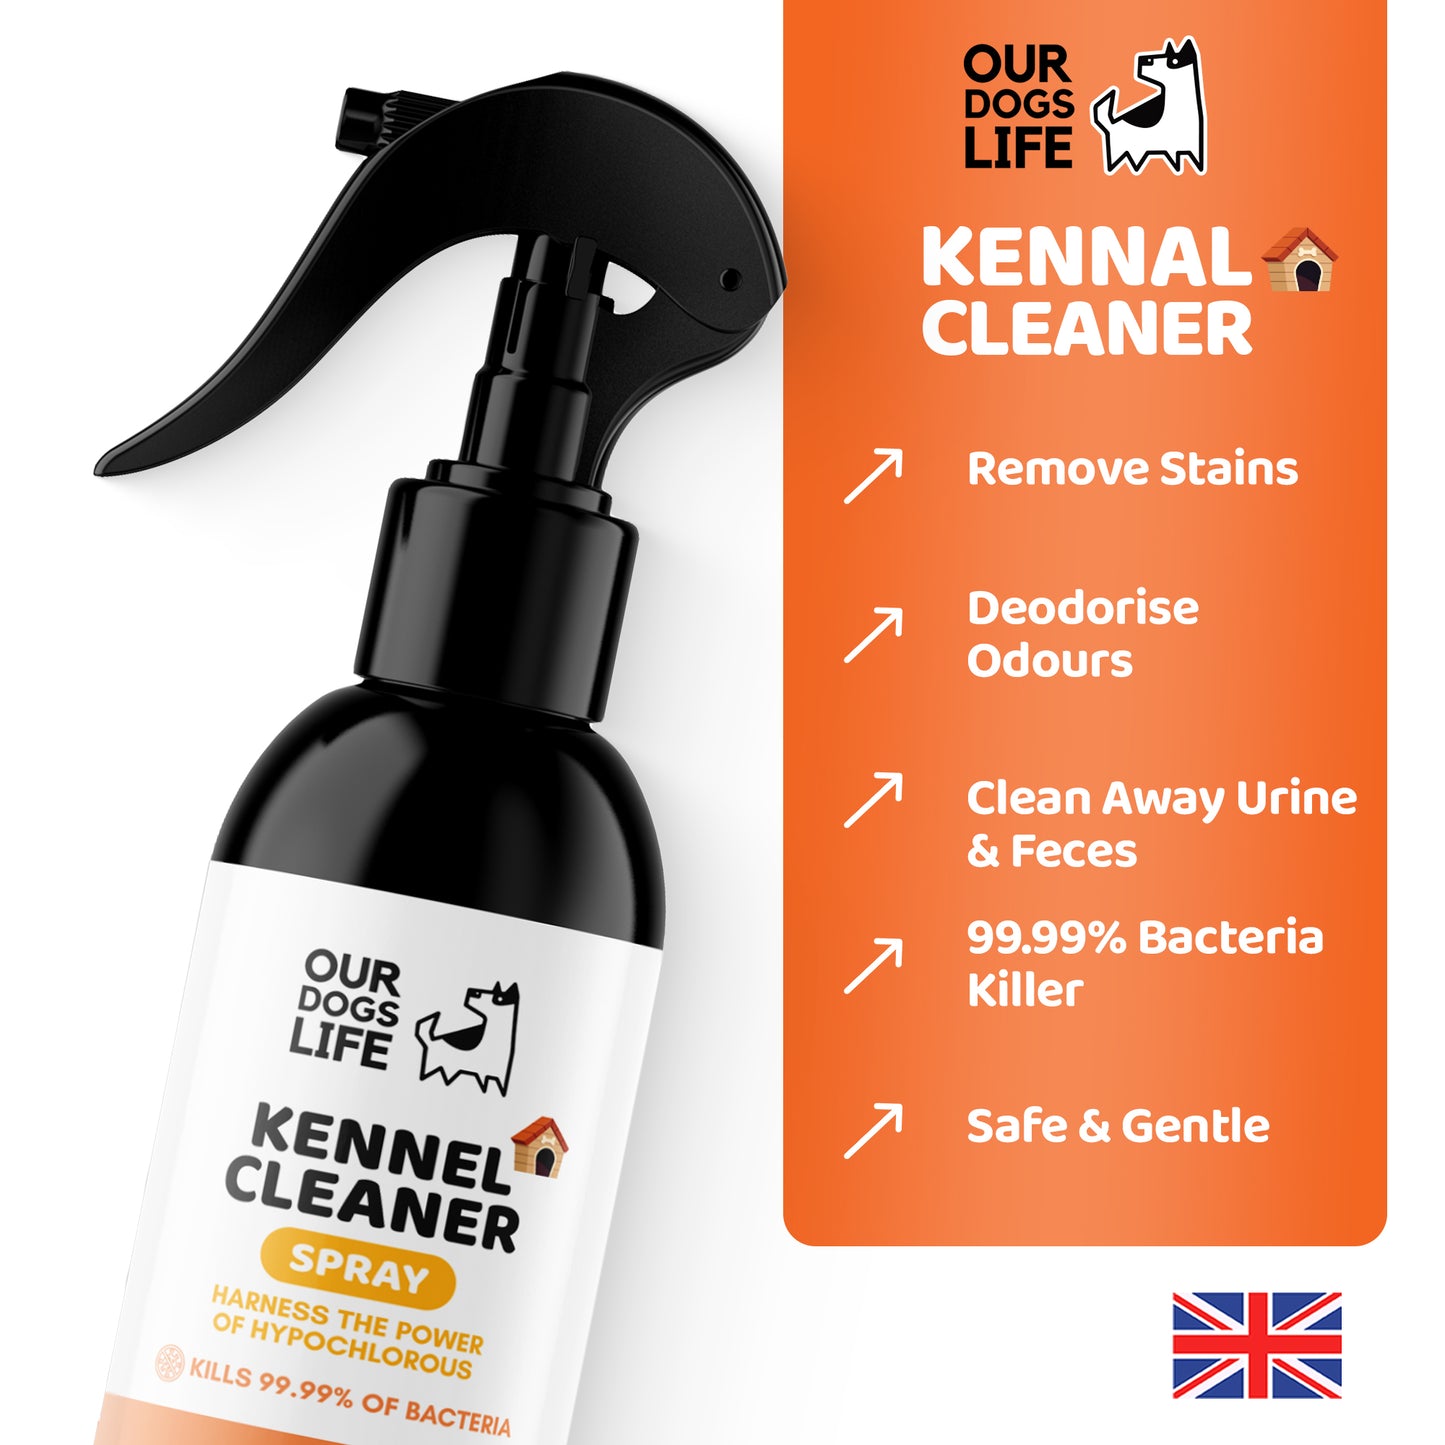 Kennel Cleaner Disinfectant for Dogs